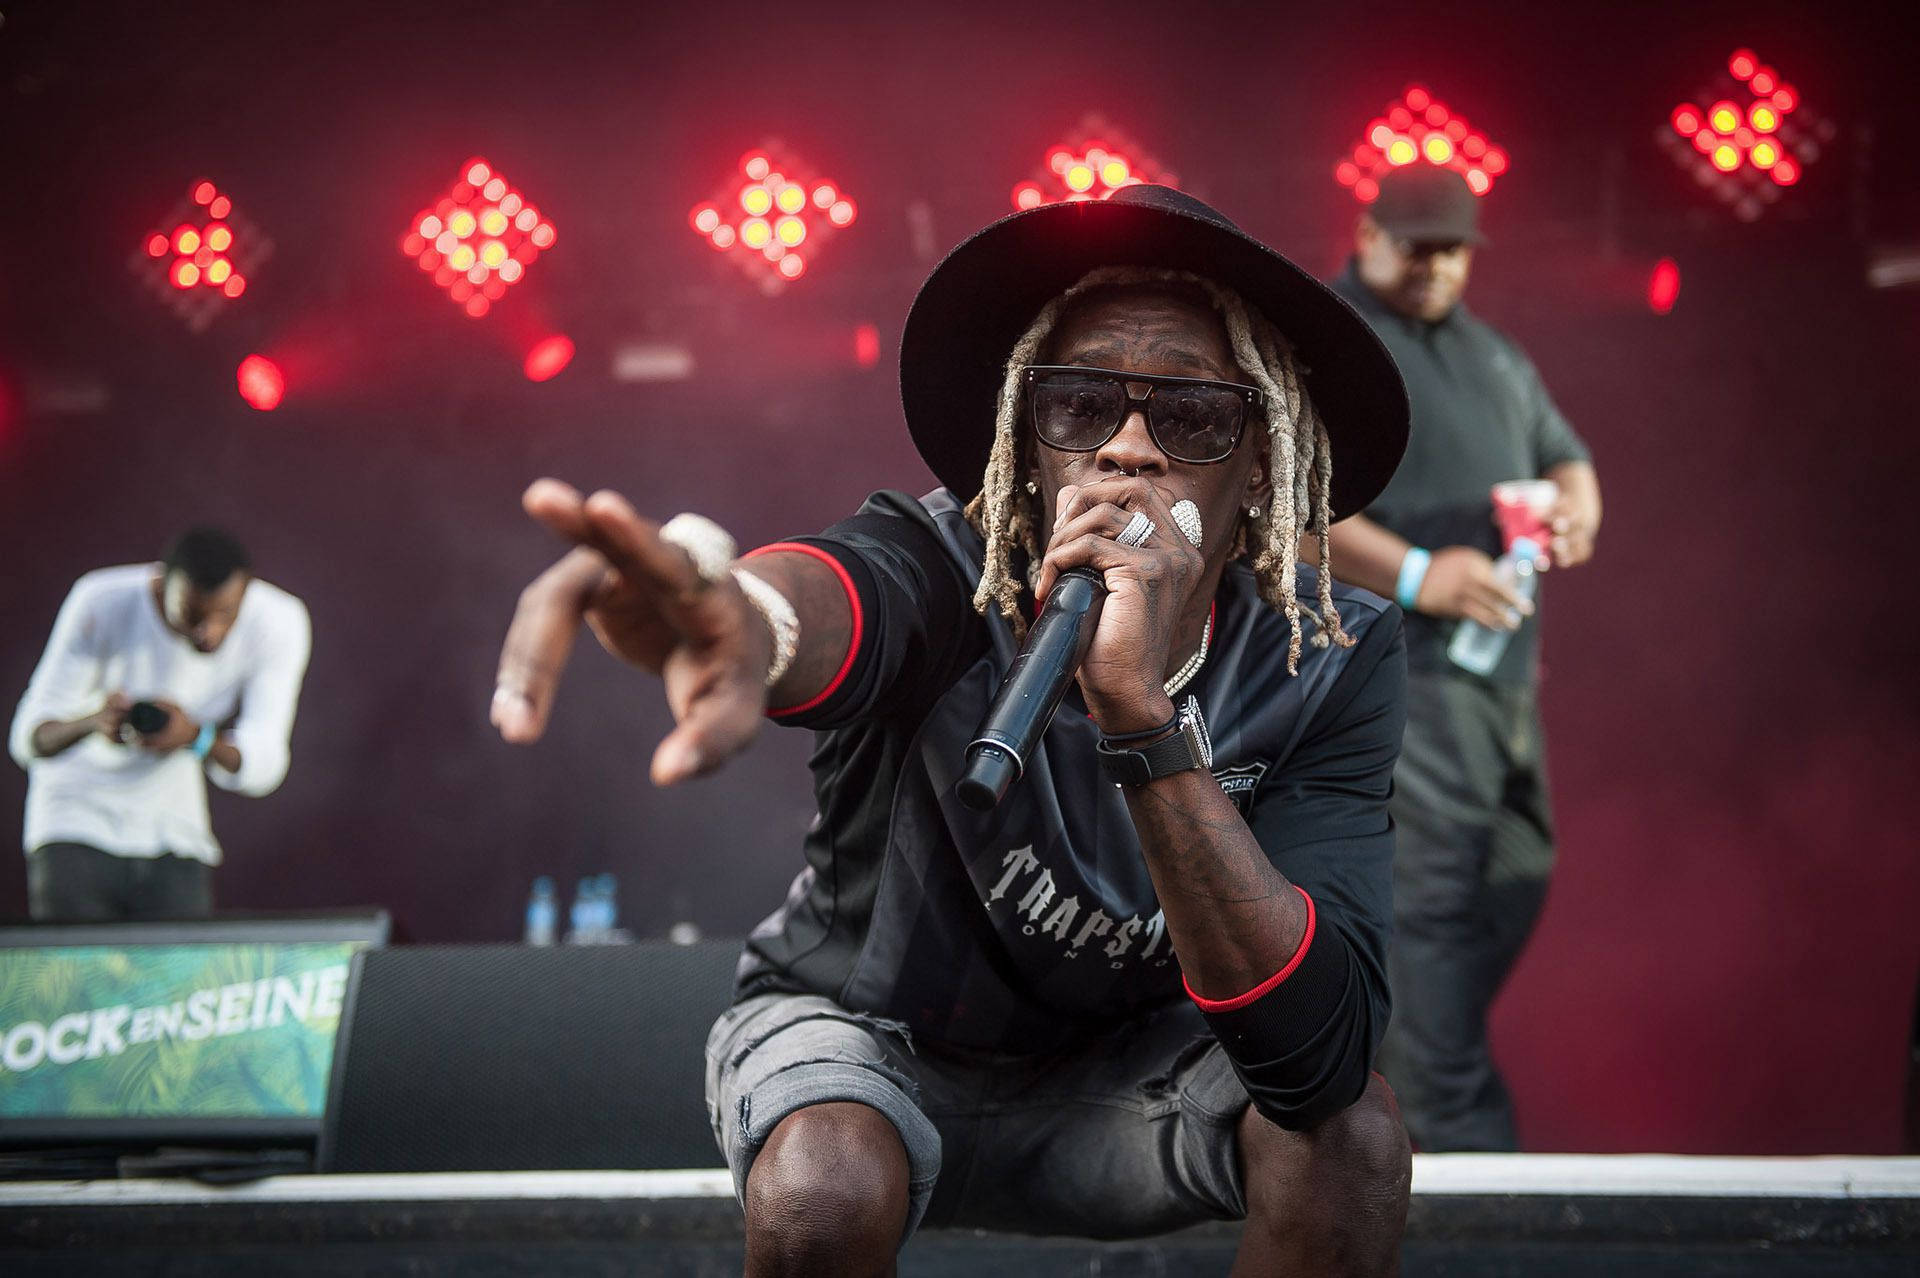 Rapper Young Thug brings the audience to their feet during a live performance Wallpaper